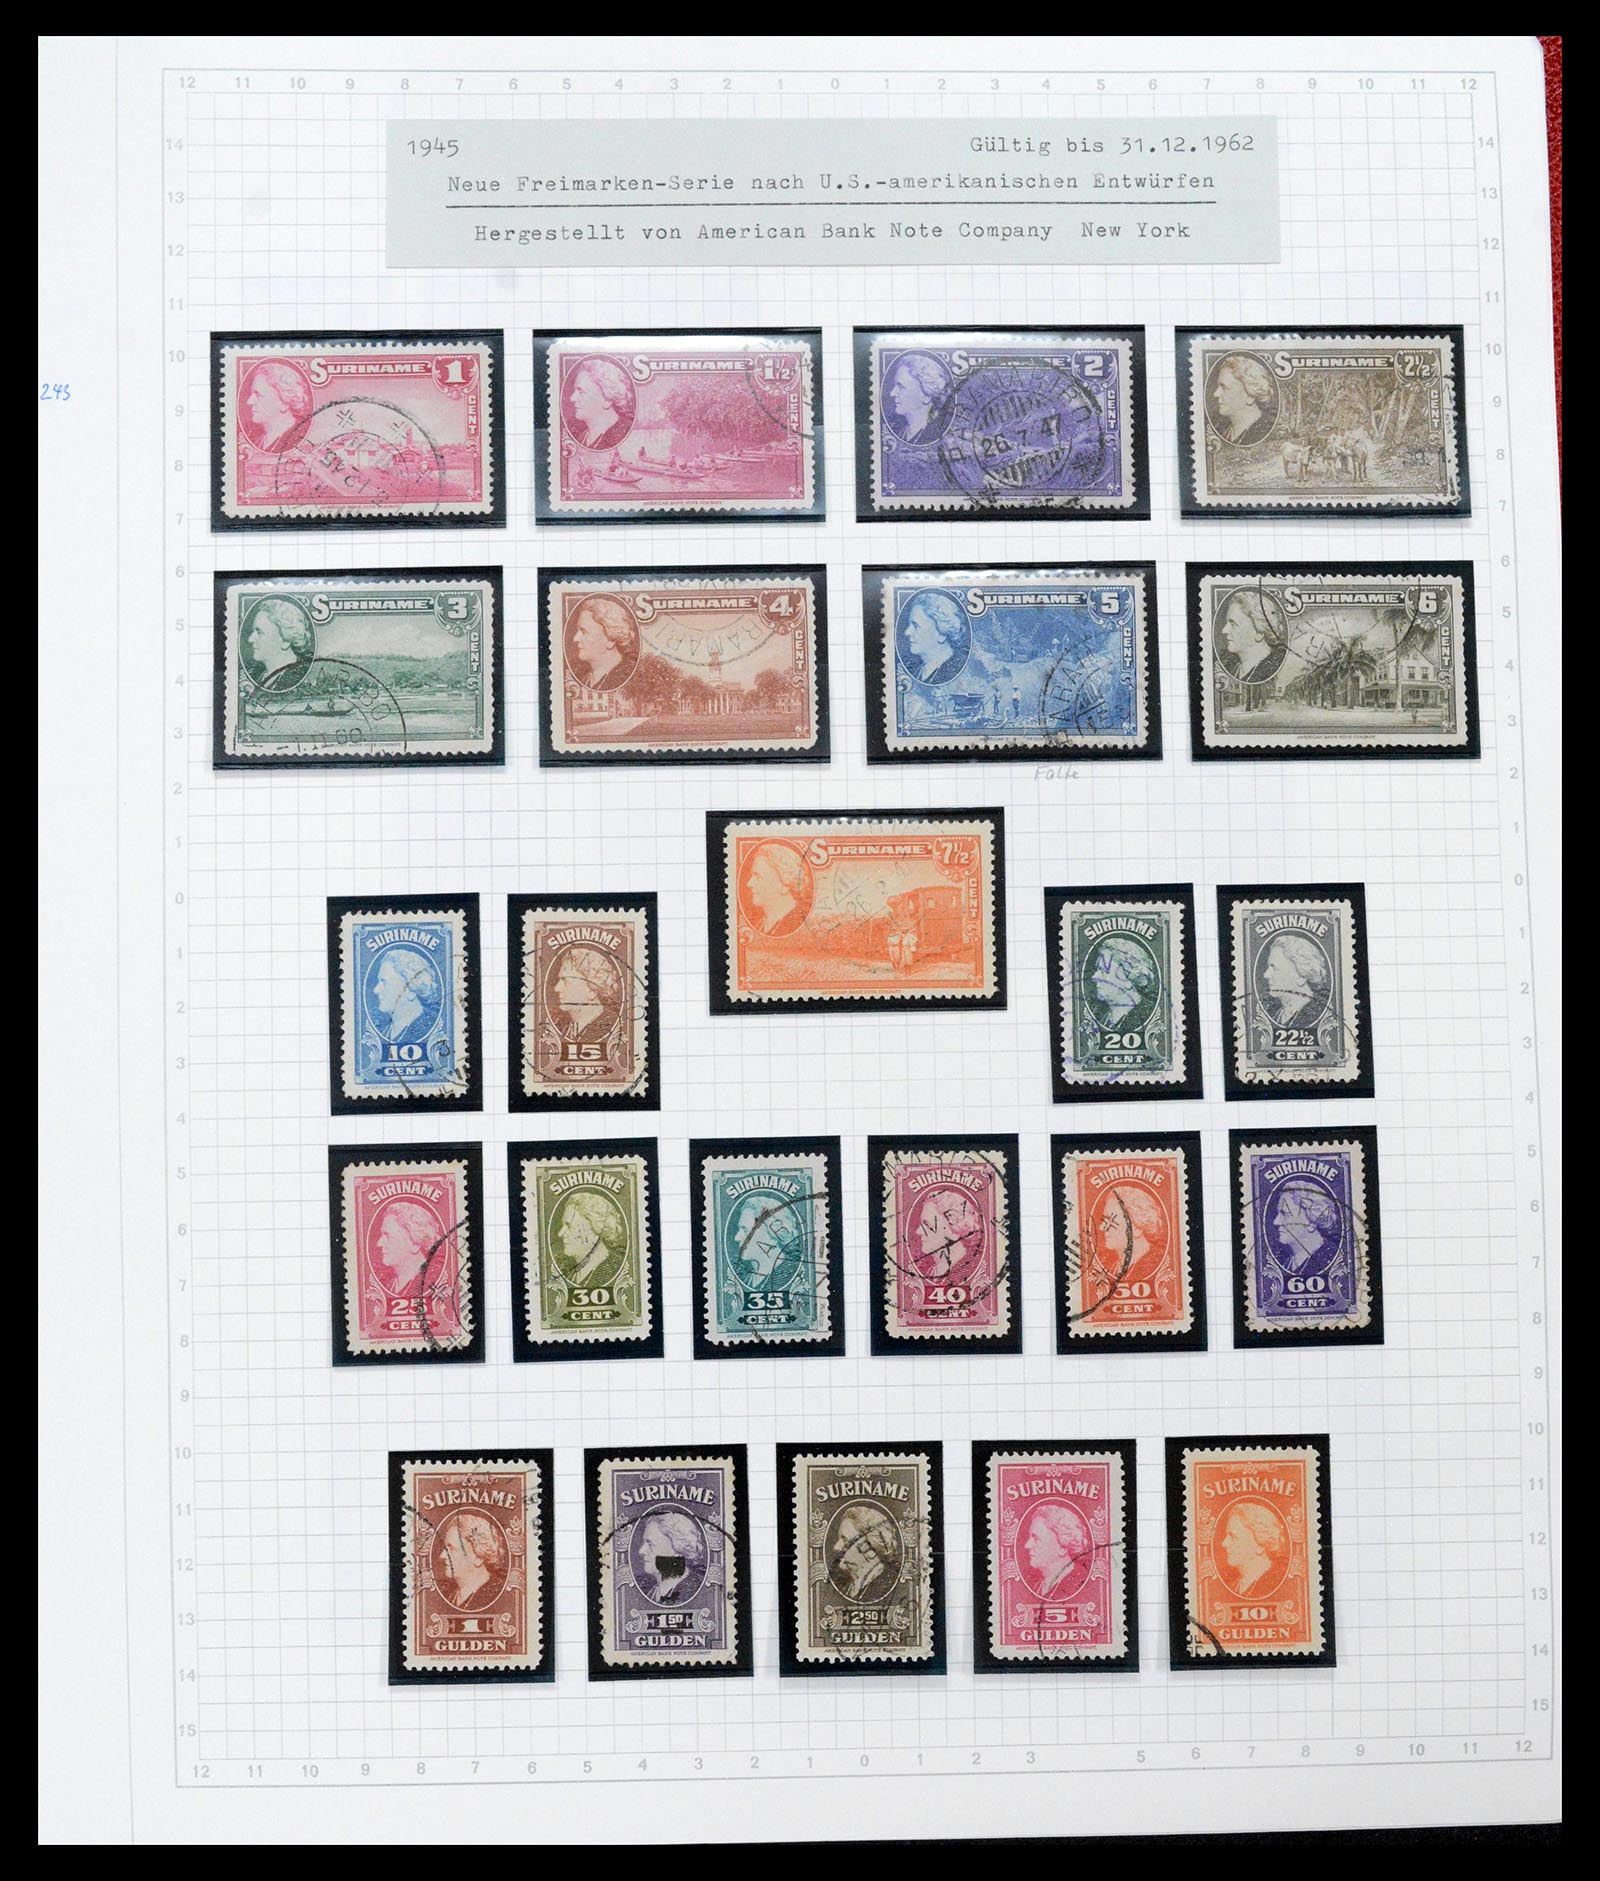 39373 0026 - Stamp collection 39373 Suriname 1873-1975.